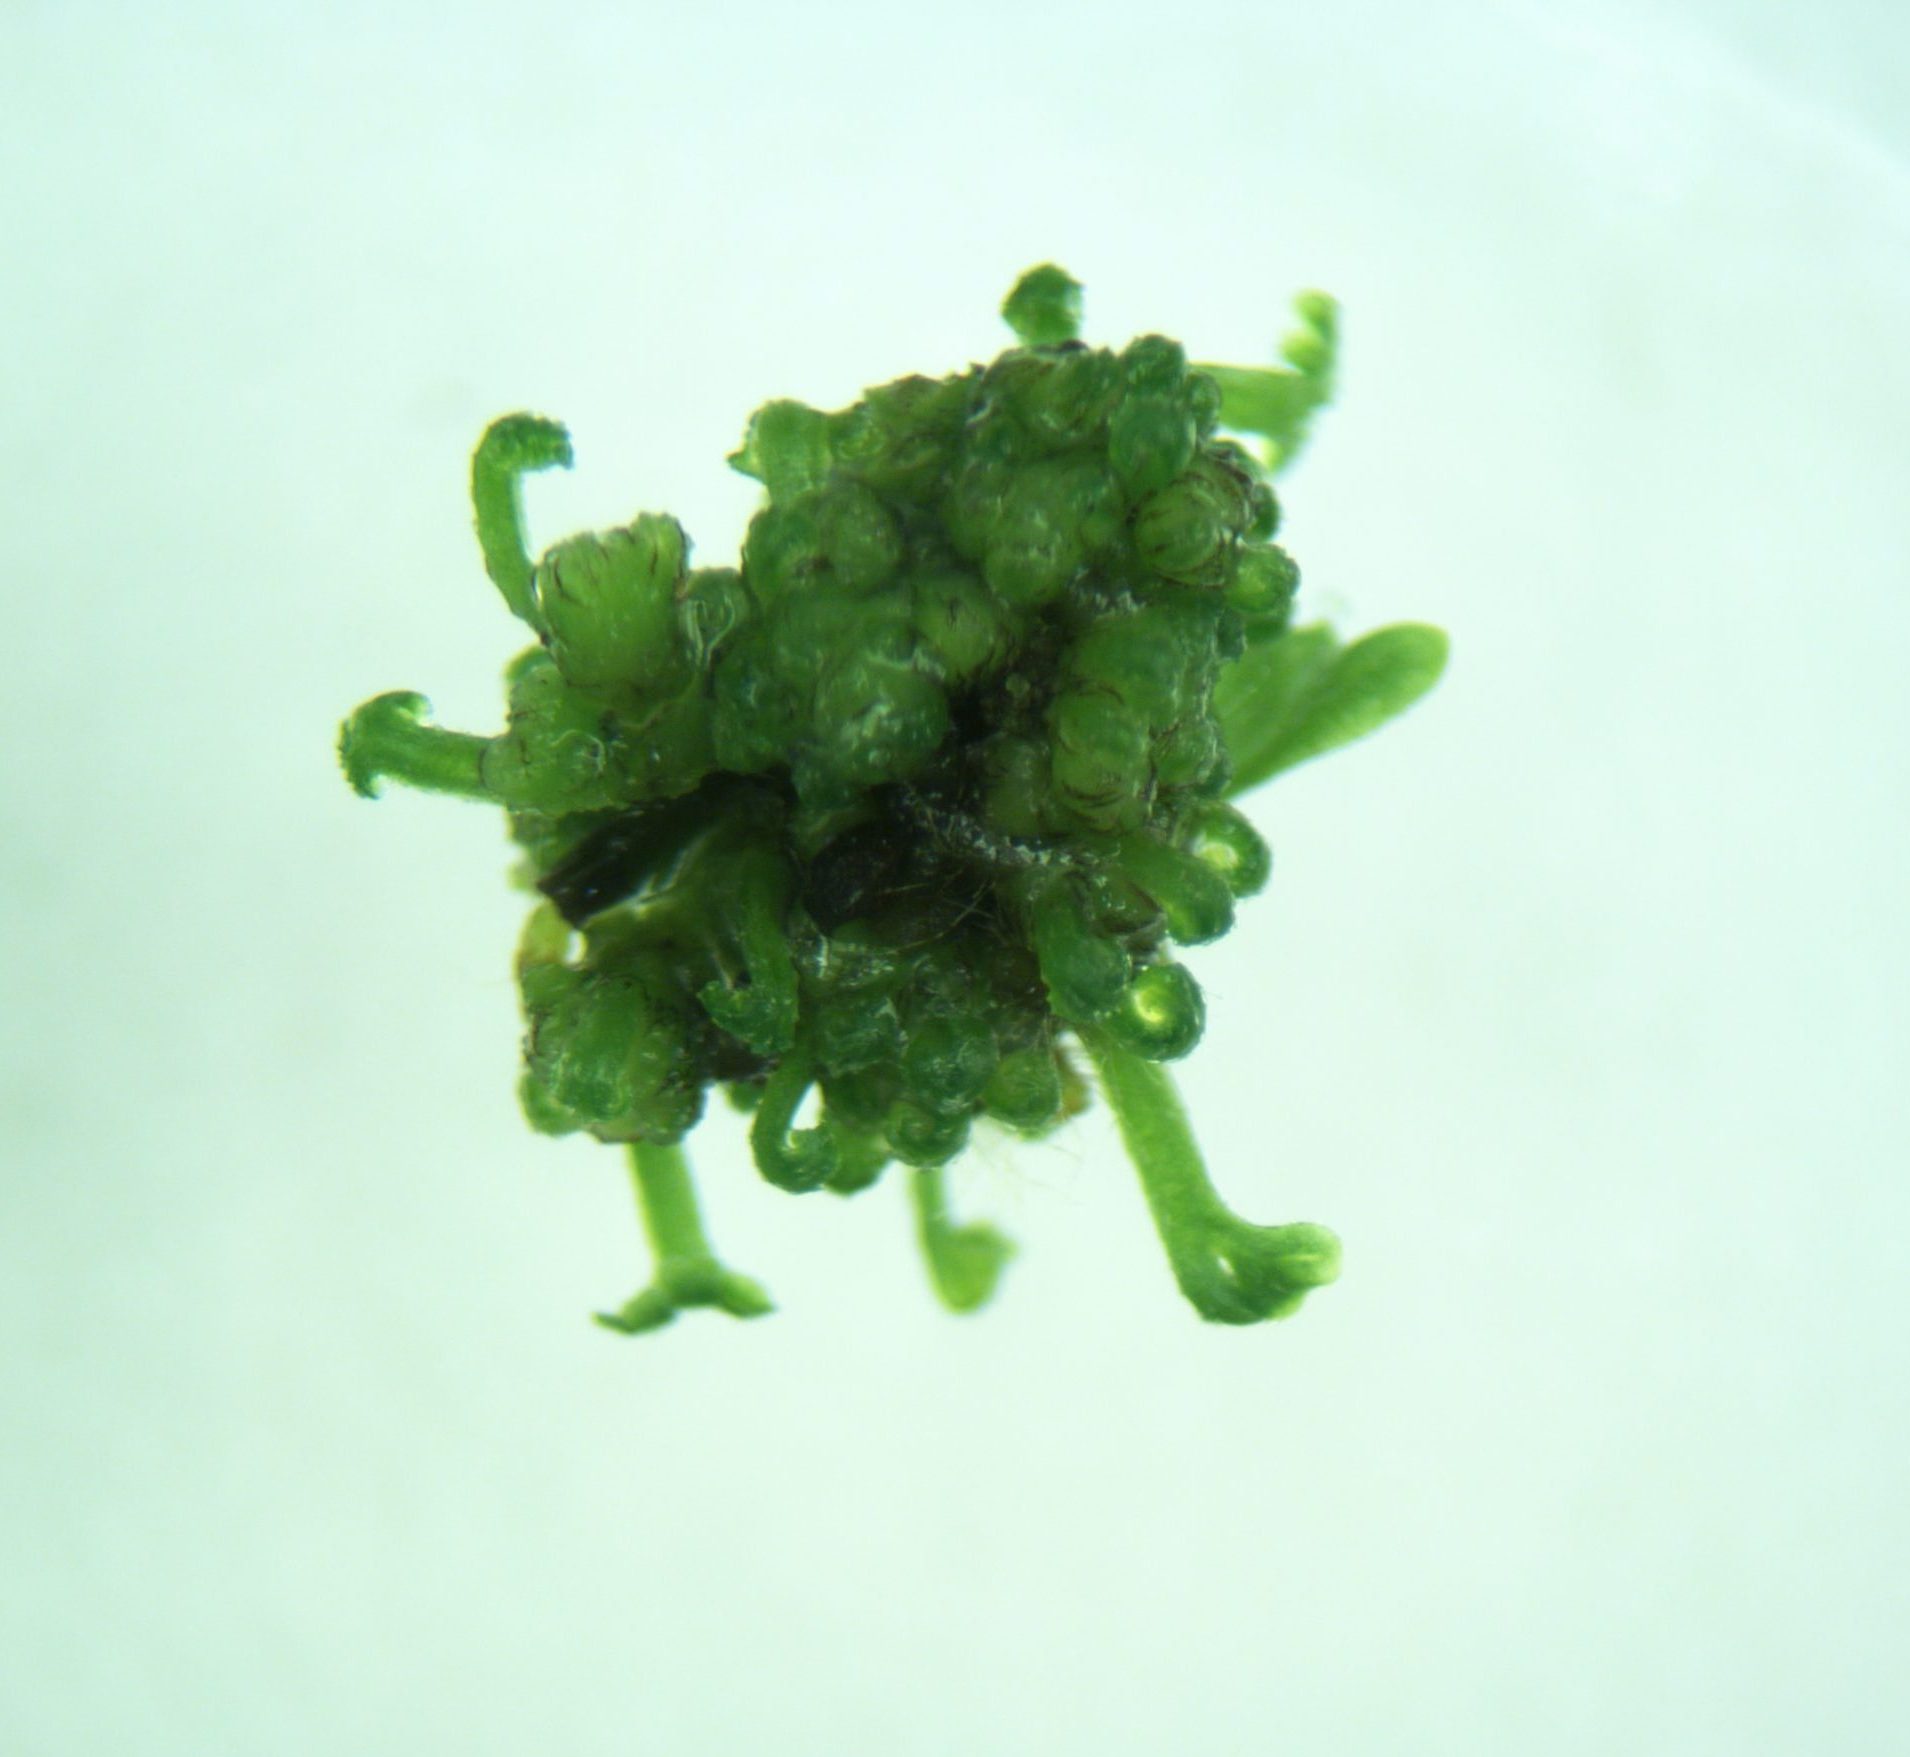 Production of green globular bodies, like this one, have been key to successfully cryopreserving a federally endangered fern (Asplenium peruvianum var. insulare) from Hawaii.